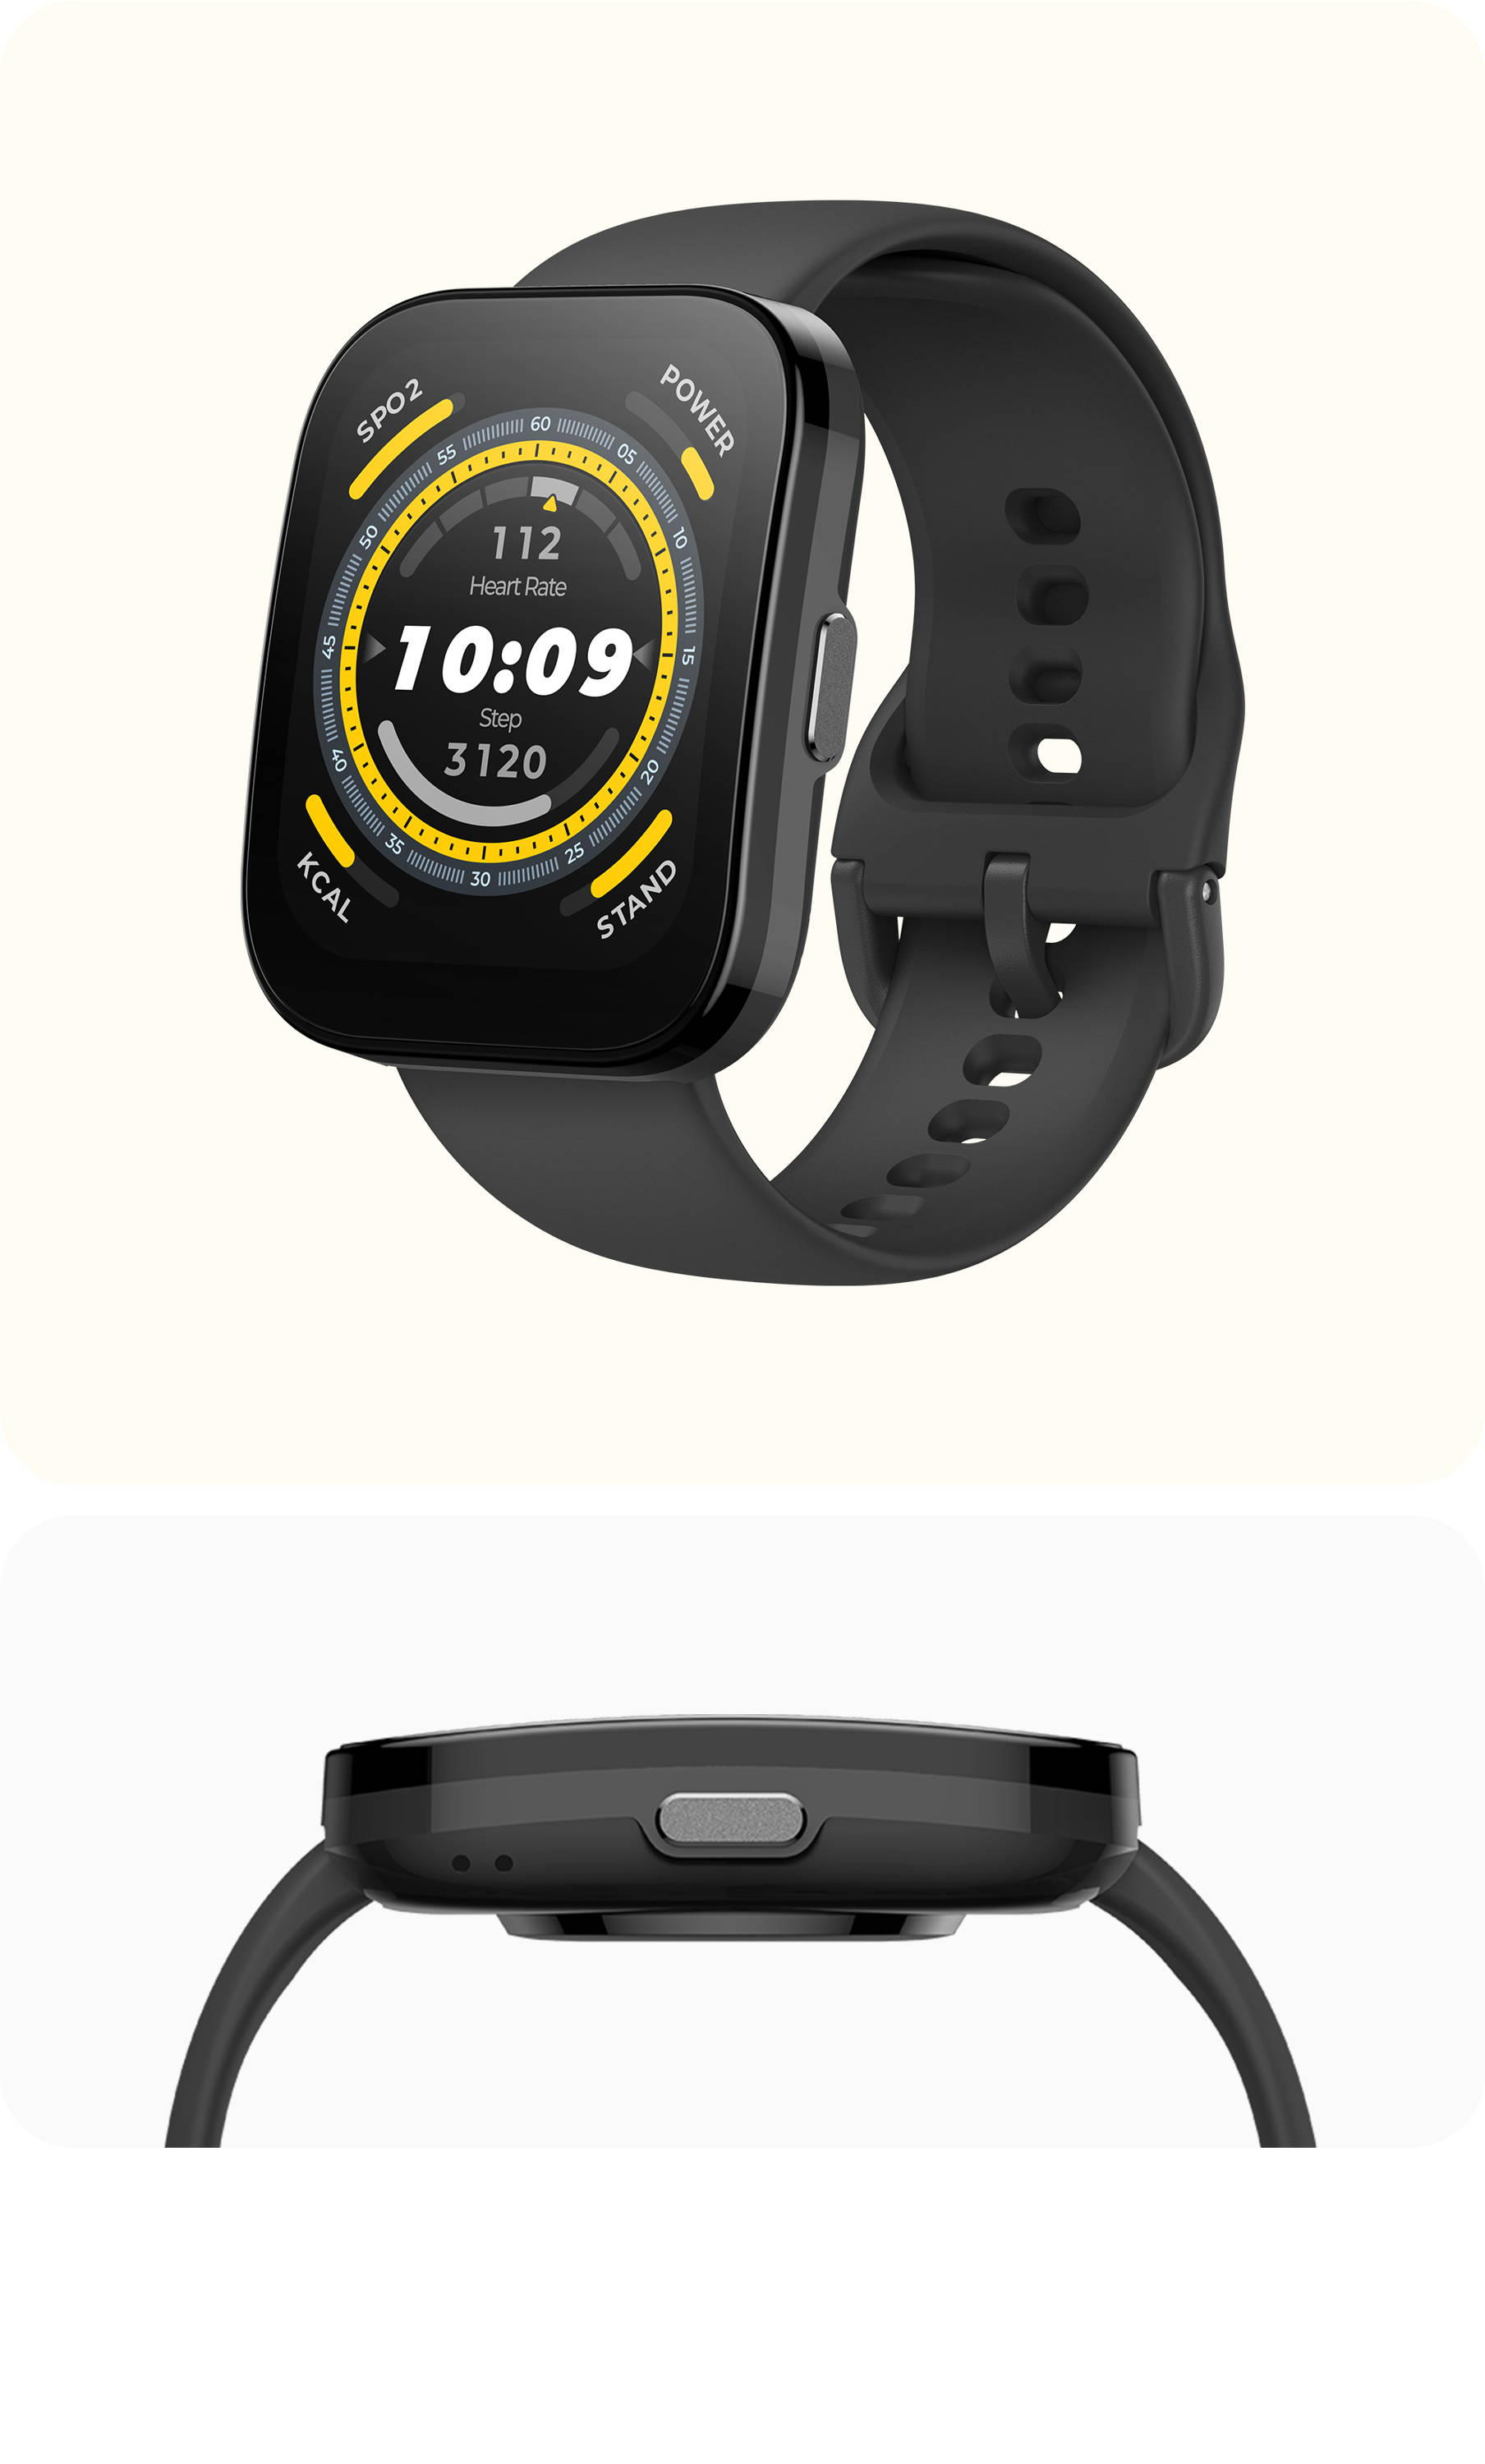 Amazfit Bip 5: Today's launch brings a smartwatch with a 1.91 display